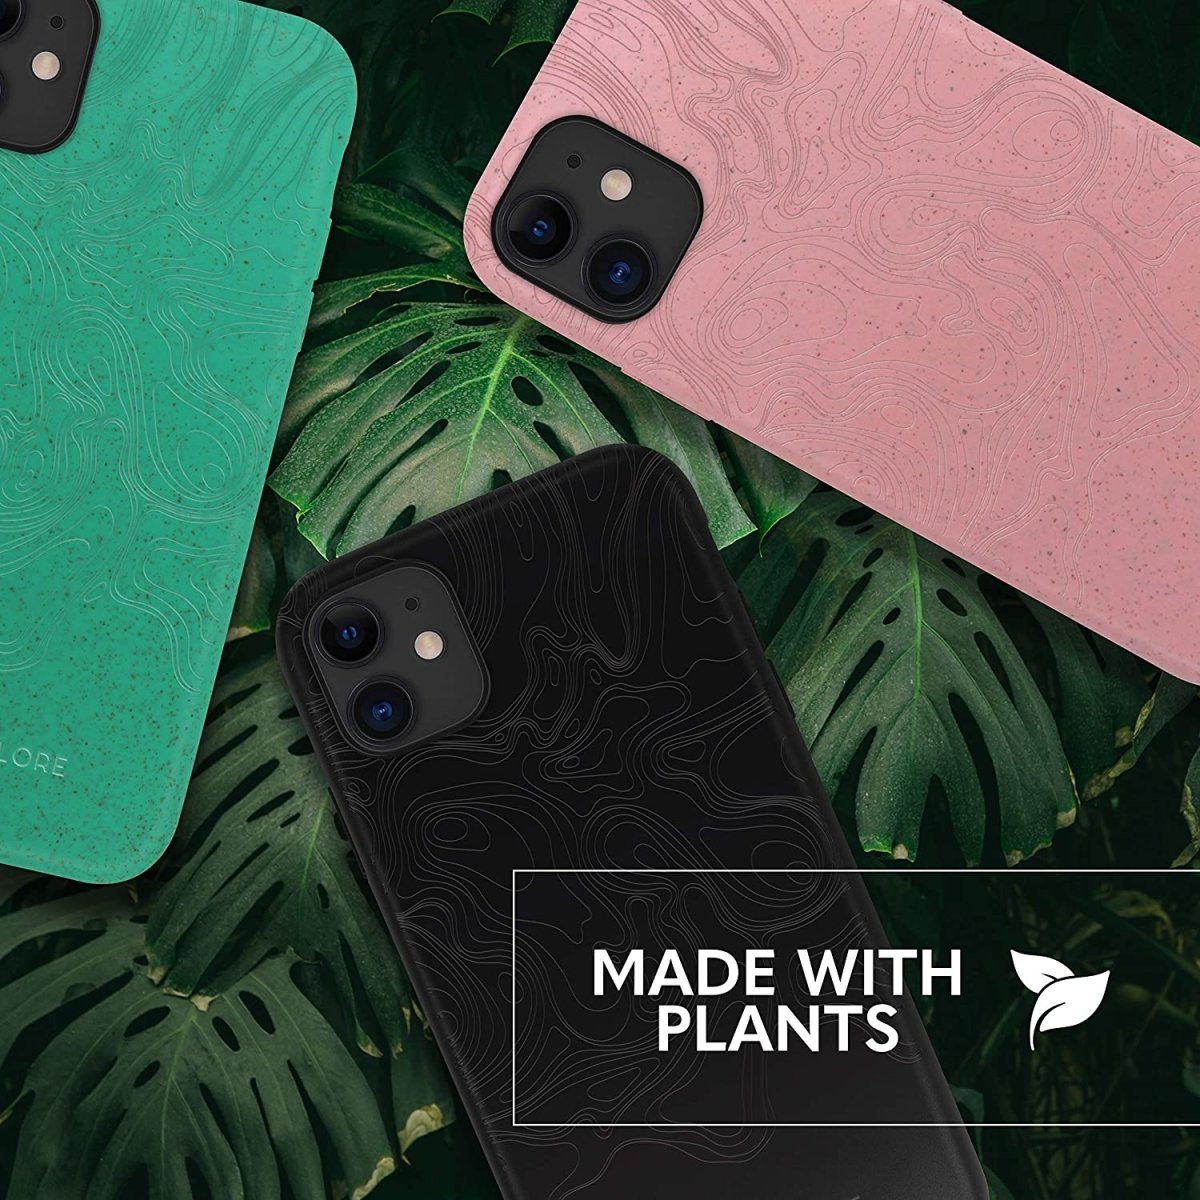 Sale - Biodegradable and Compostable Eco iPhone 11 Pro Case (Pink) - Loam & Lore